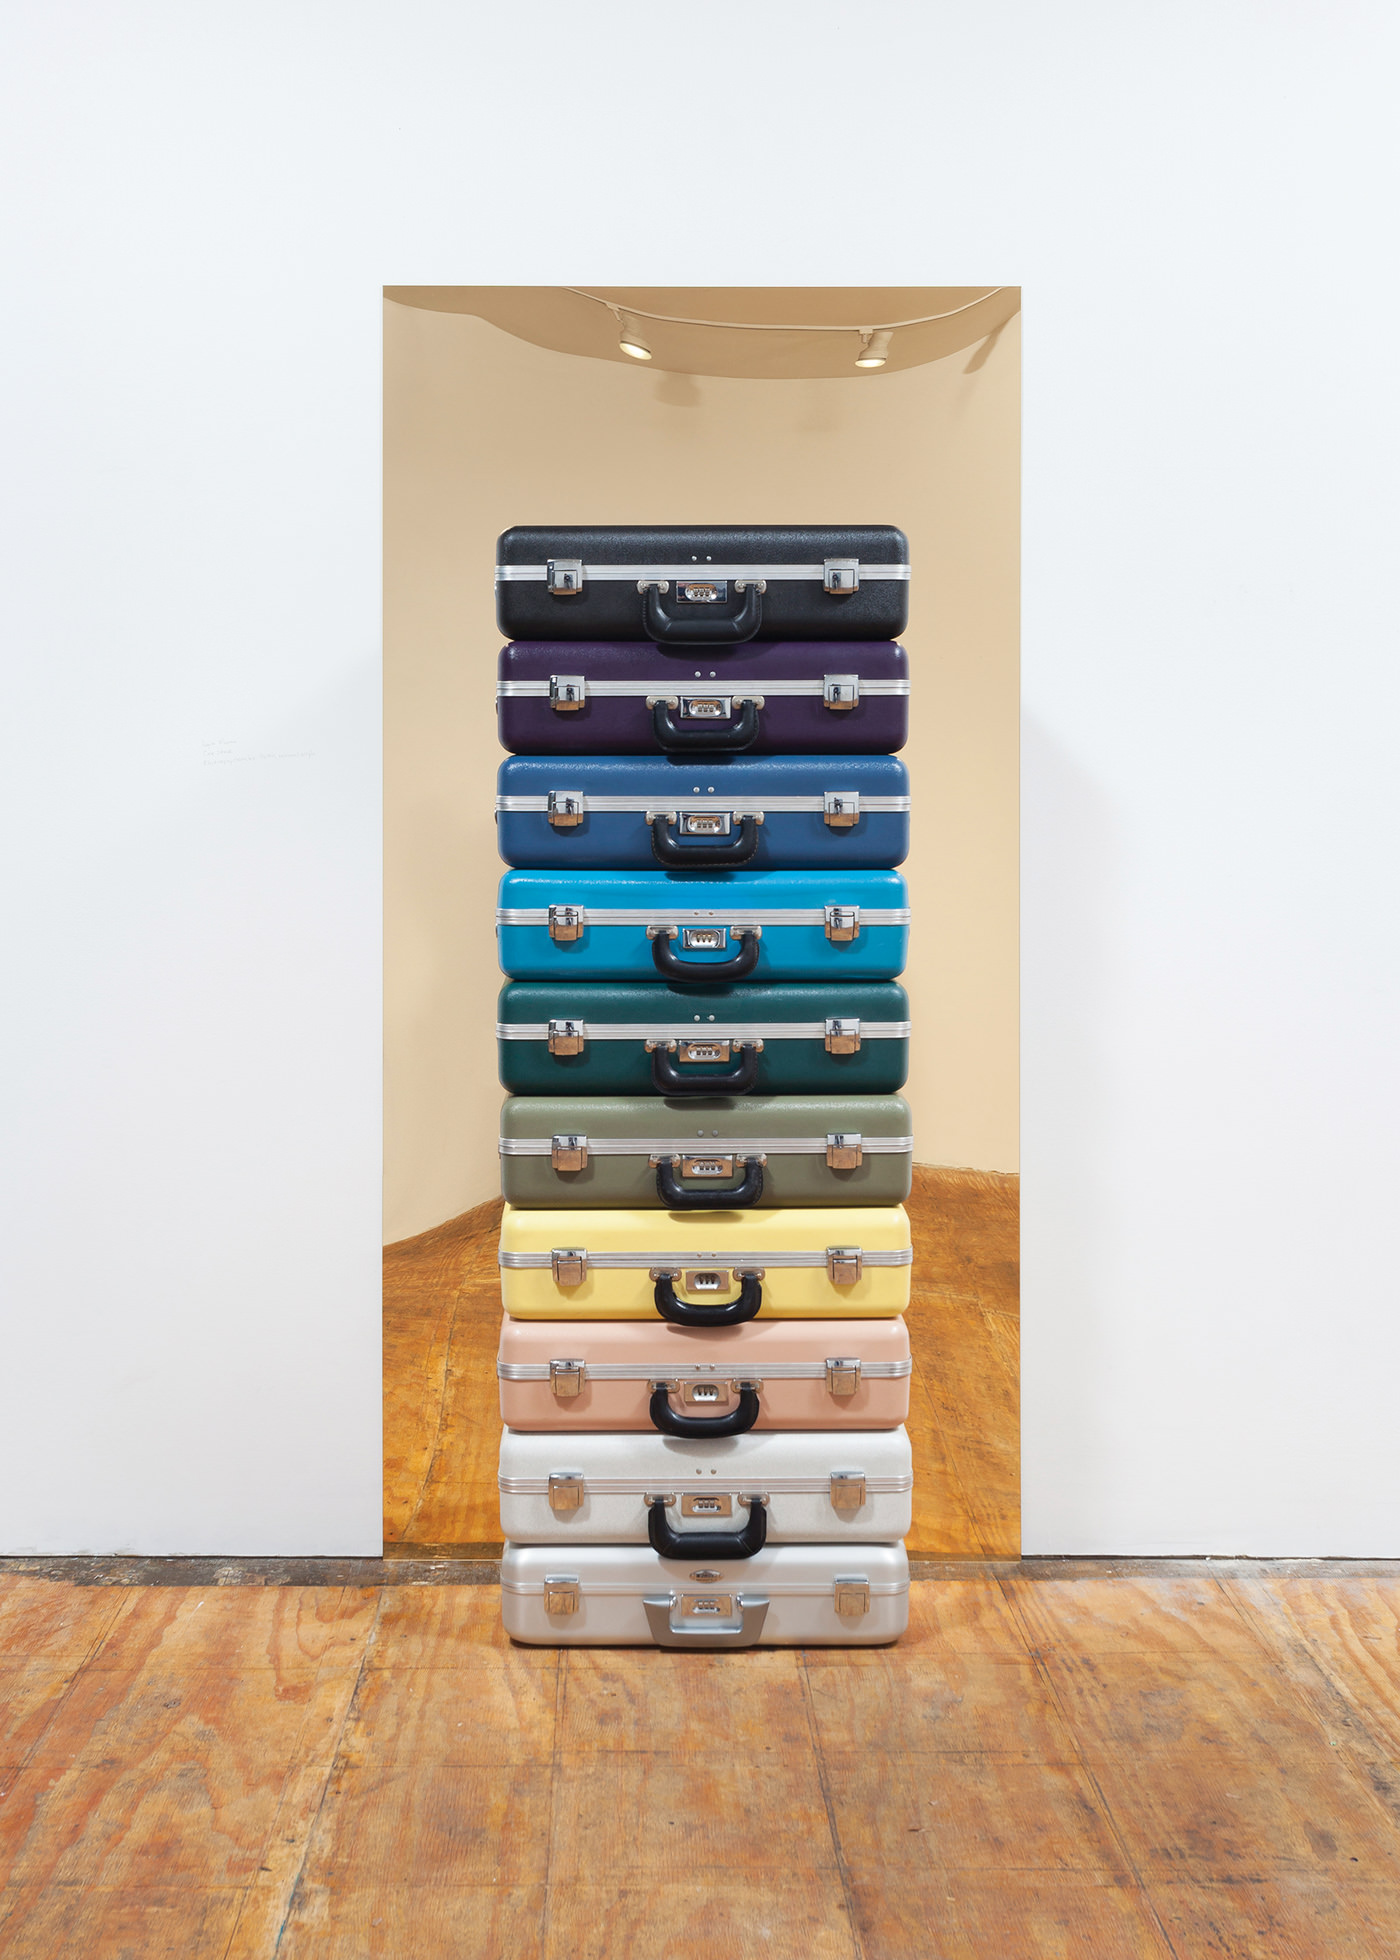 Regina Mamou  Untitled (Case Stack), 2015 Installation at Slow Gallery, Chicago  Electropsychometer cases, mirrored acrylic  Electropsychometer cases: 6 x 24 x 16 inches (each); Acrylic element: 72 x 36 inches